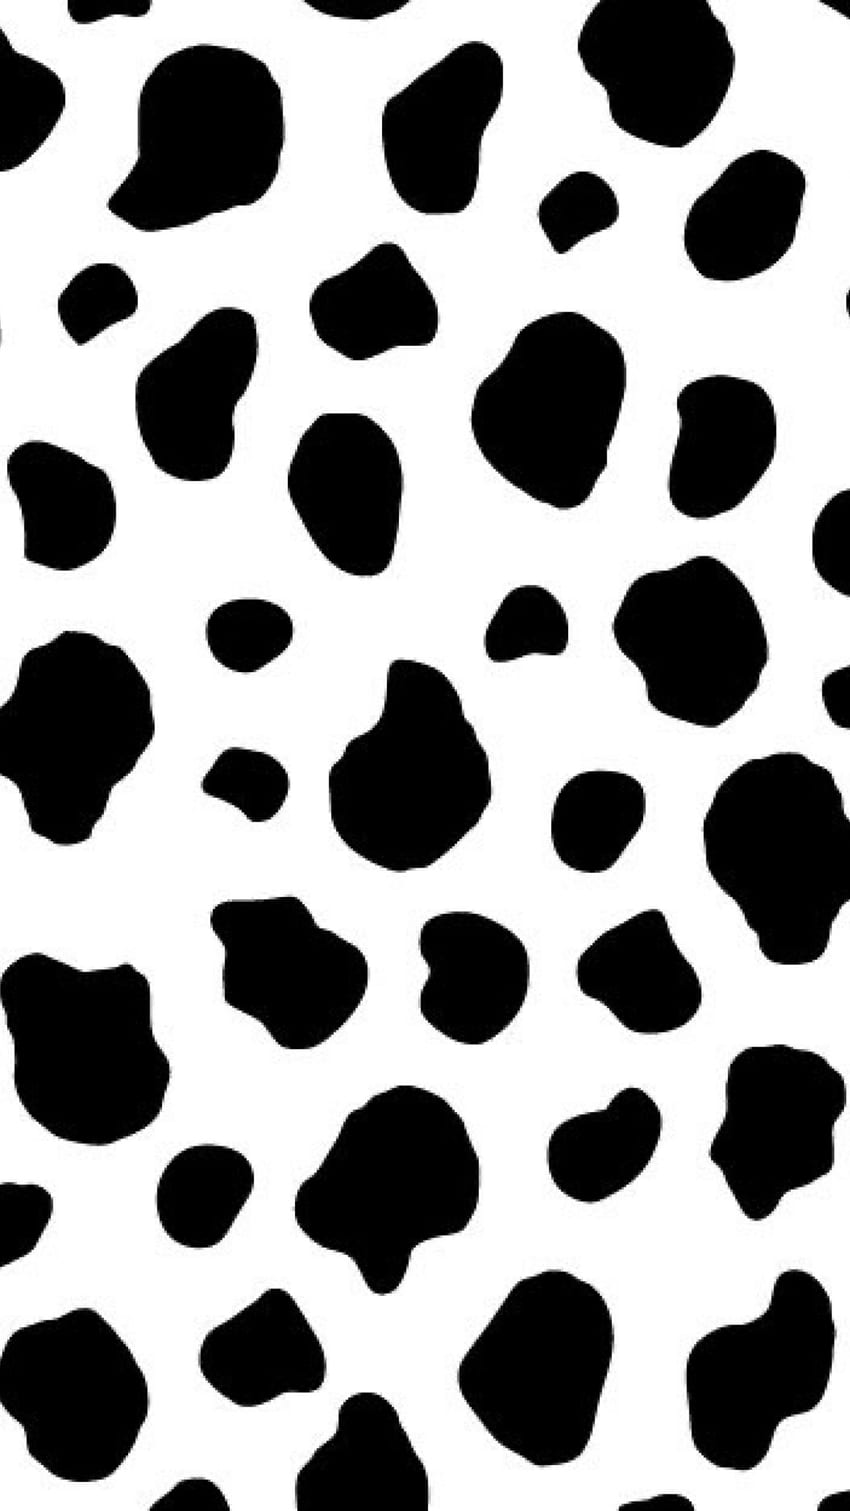 GOOD MOO Cows Lover Aesthetic Cow Print pattern Black and White Cow Skin  Monogram Initial Letter Y Cow Blotchy Pattern Cute Animal Print Design 6 x  9  and Christmas Gifts With